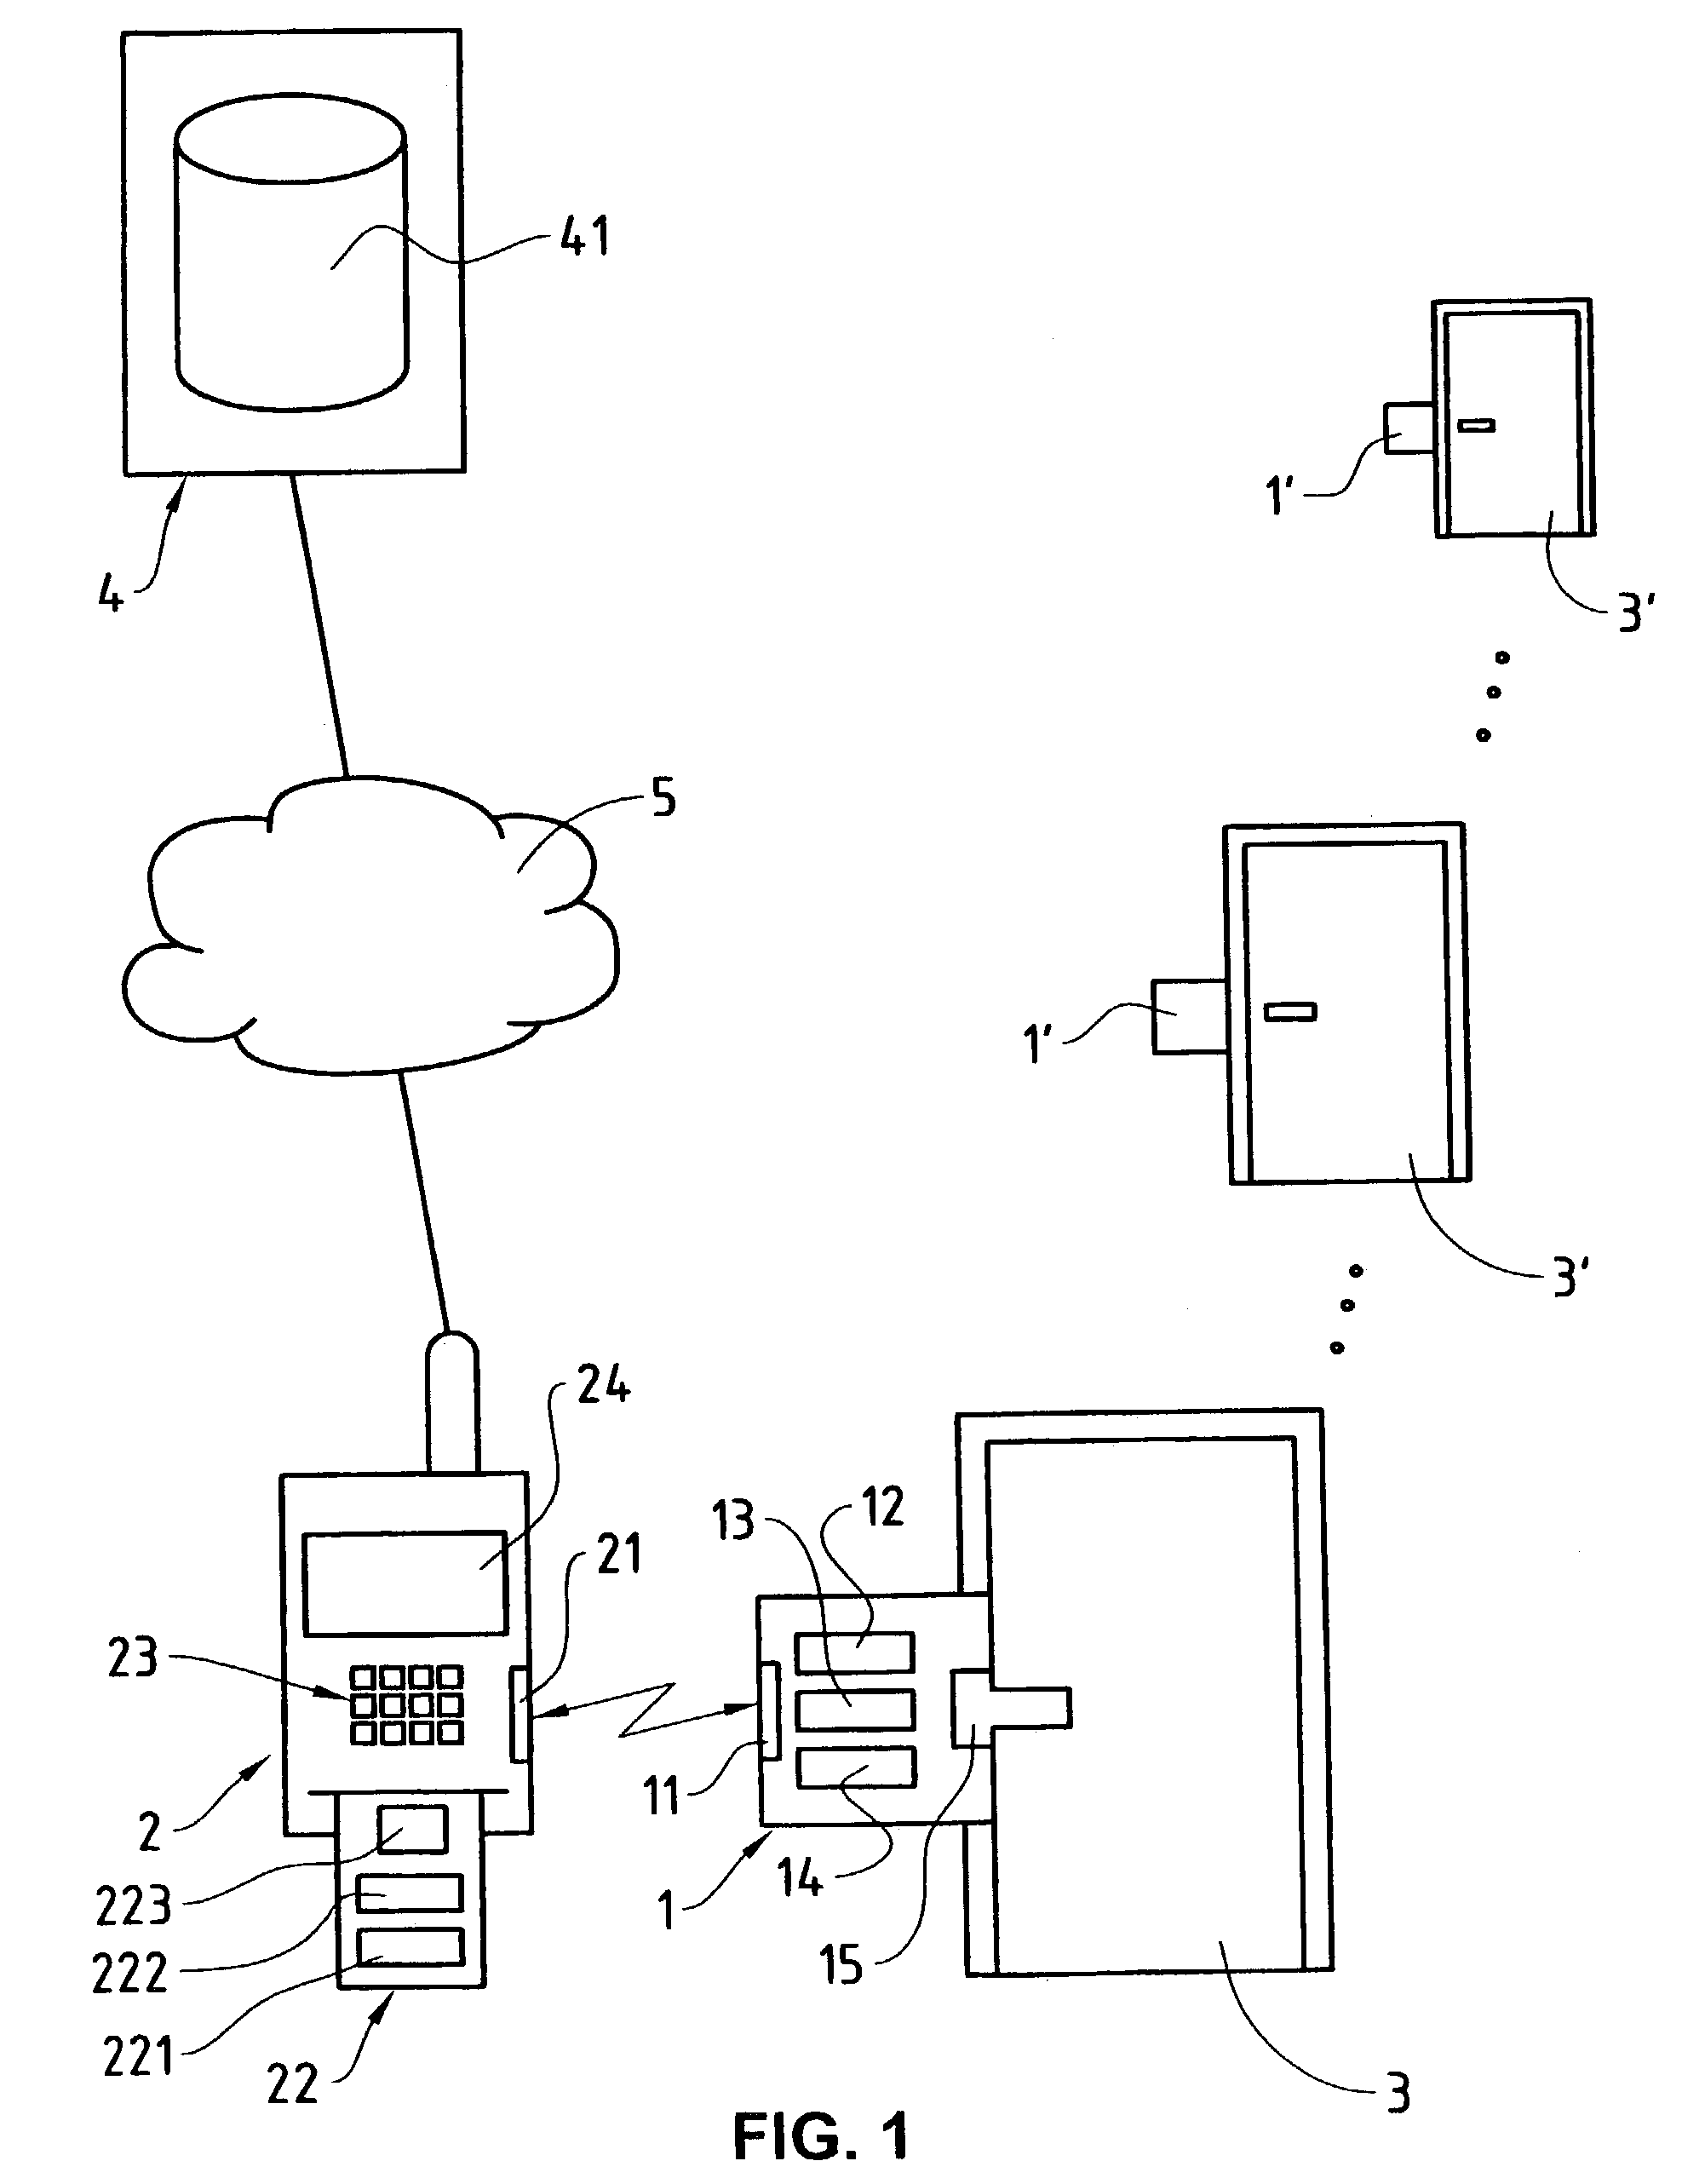 Access control system, access control method and devices suitable therefor